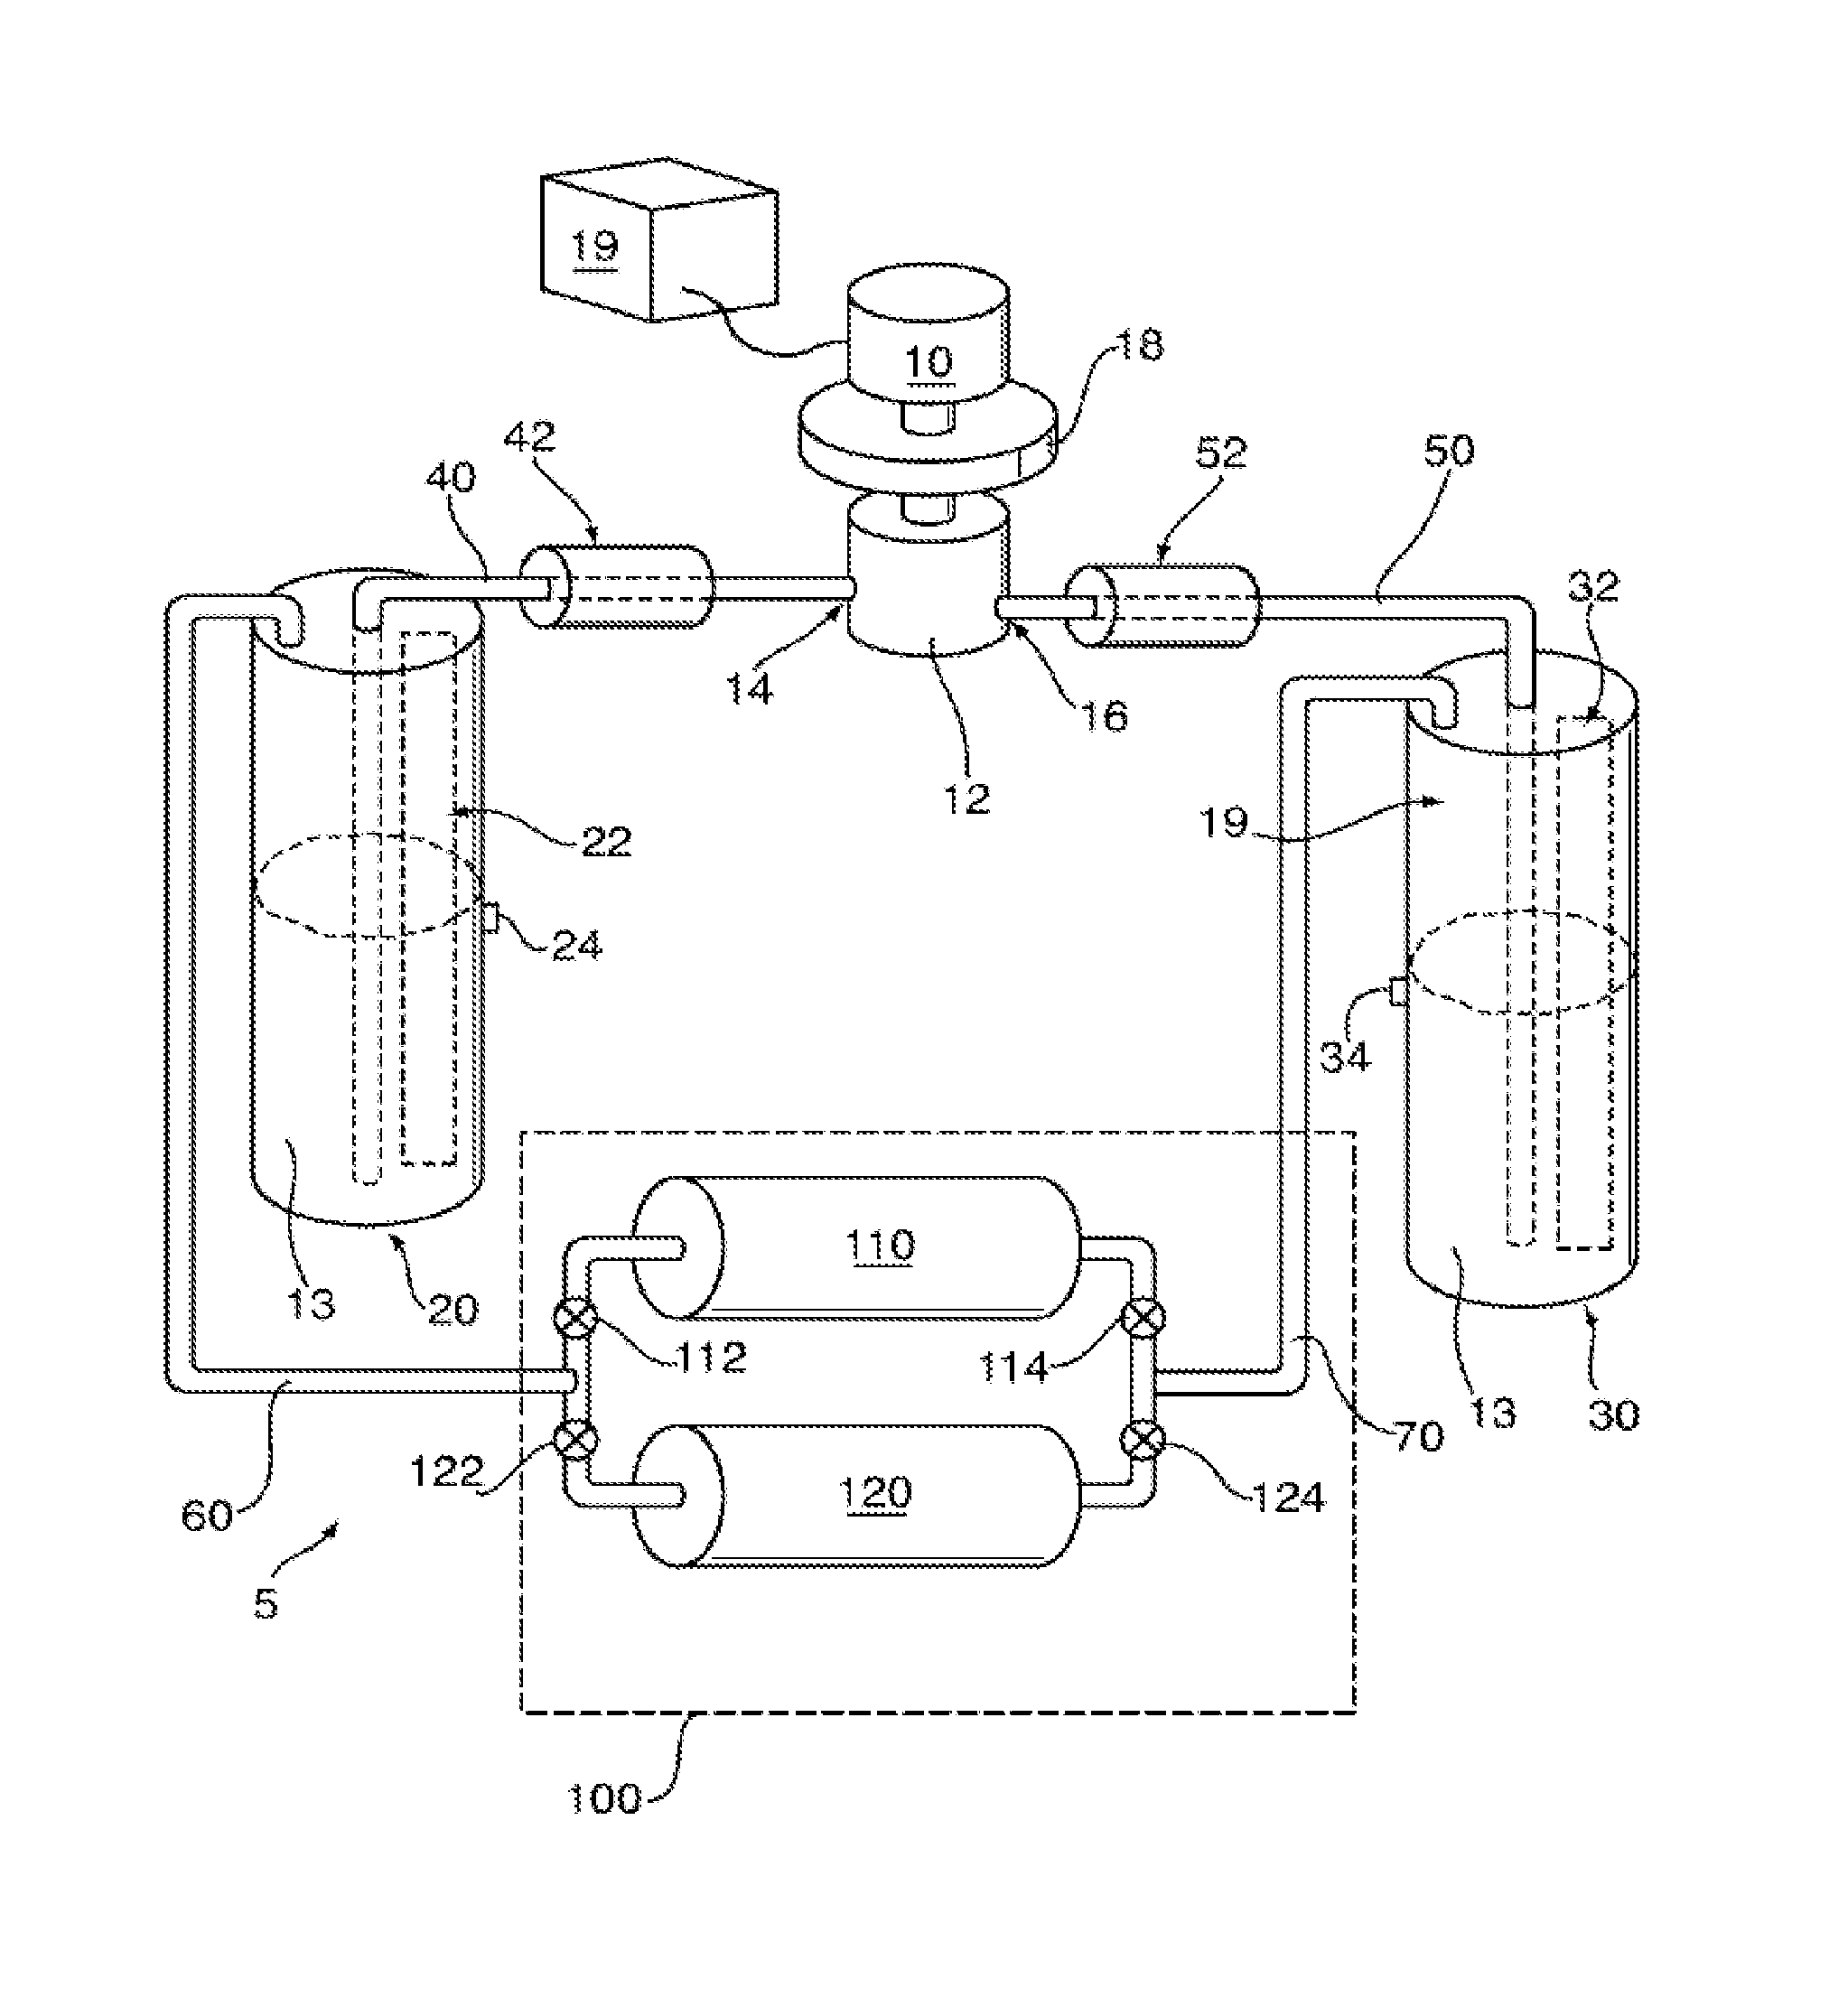 System and method for energy storage and retrieval